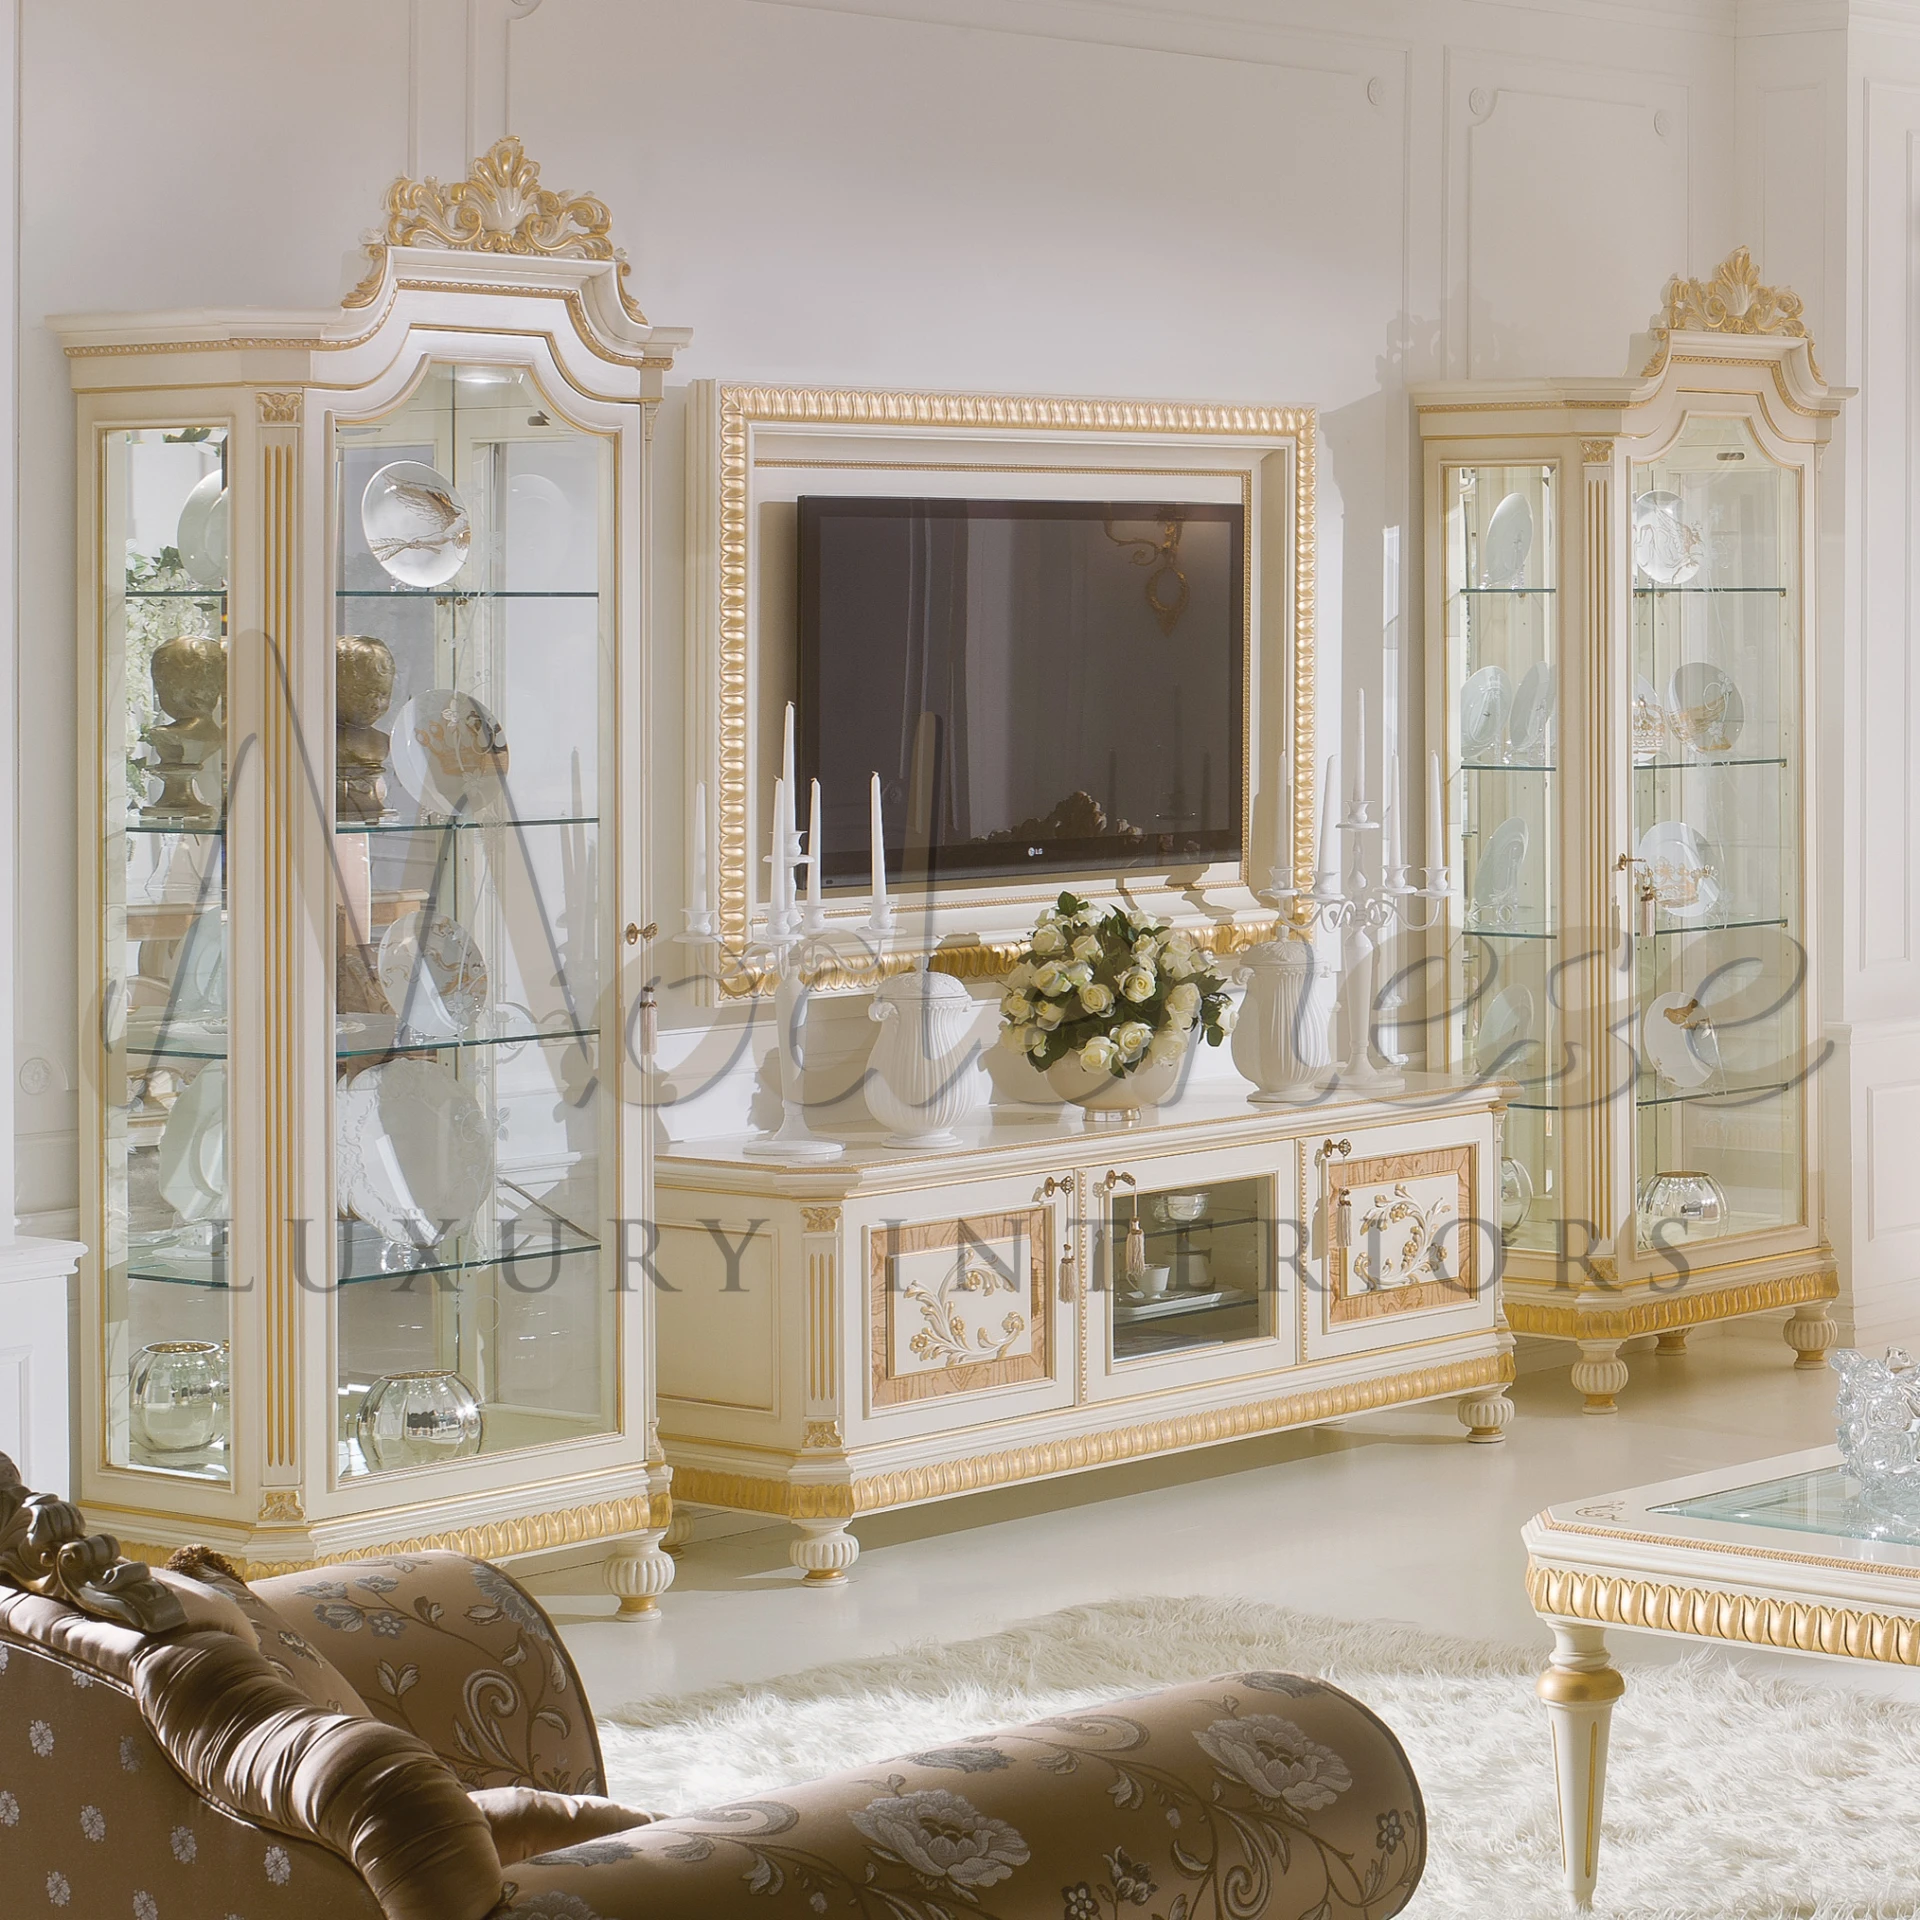 A beautiful decorated room with a big gold framed mirror and a wooden table, empire vitrine with golden patterns.